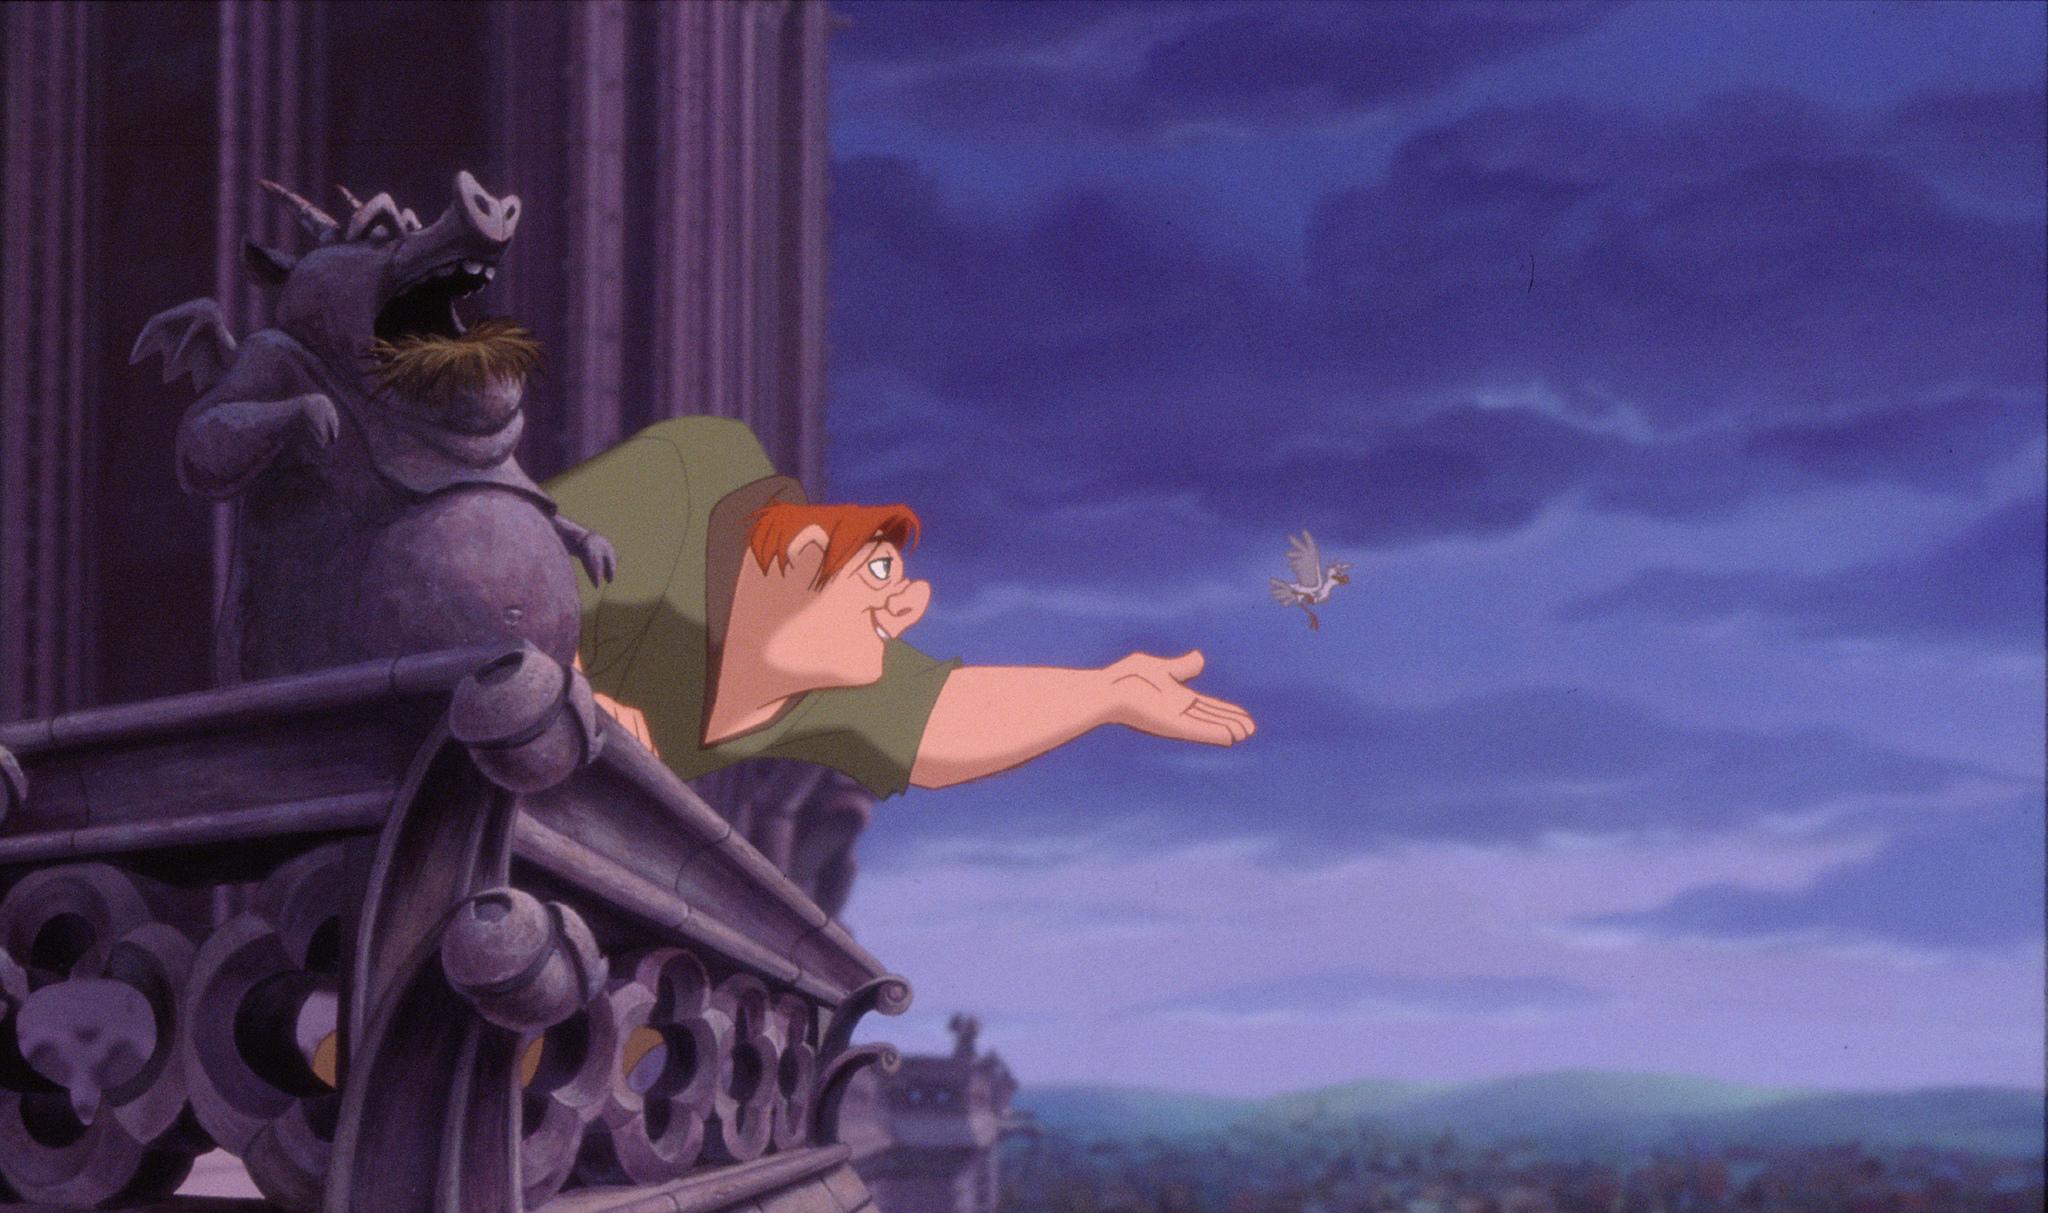 Hunchback Of Notre Dame Quotes. QuotesGram